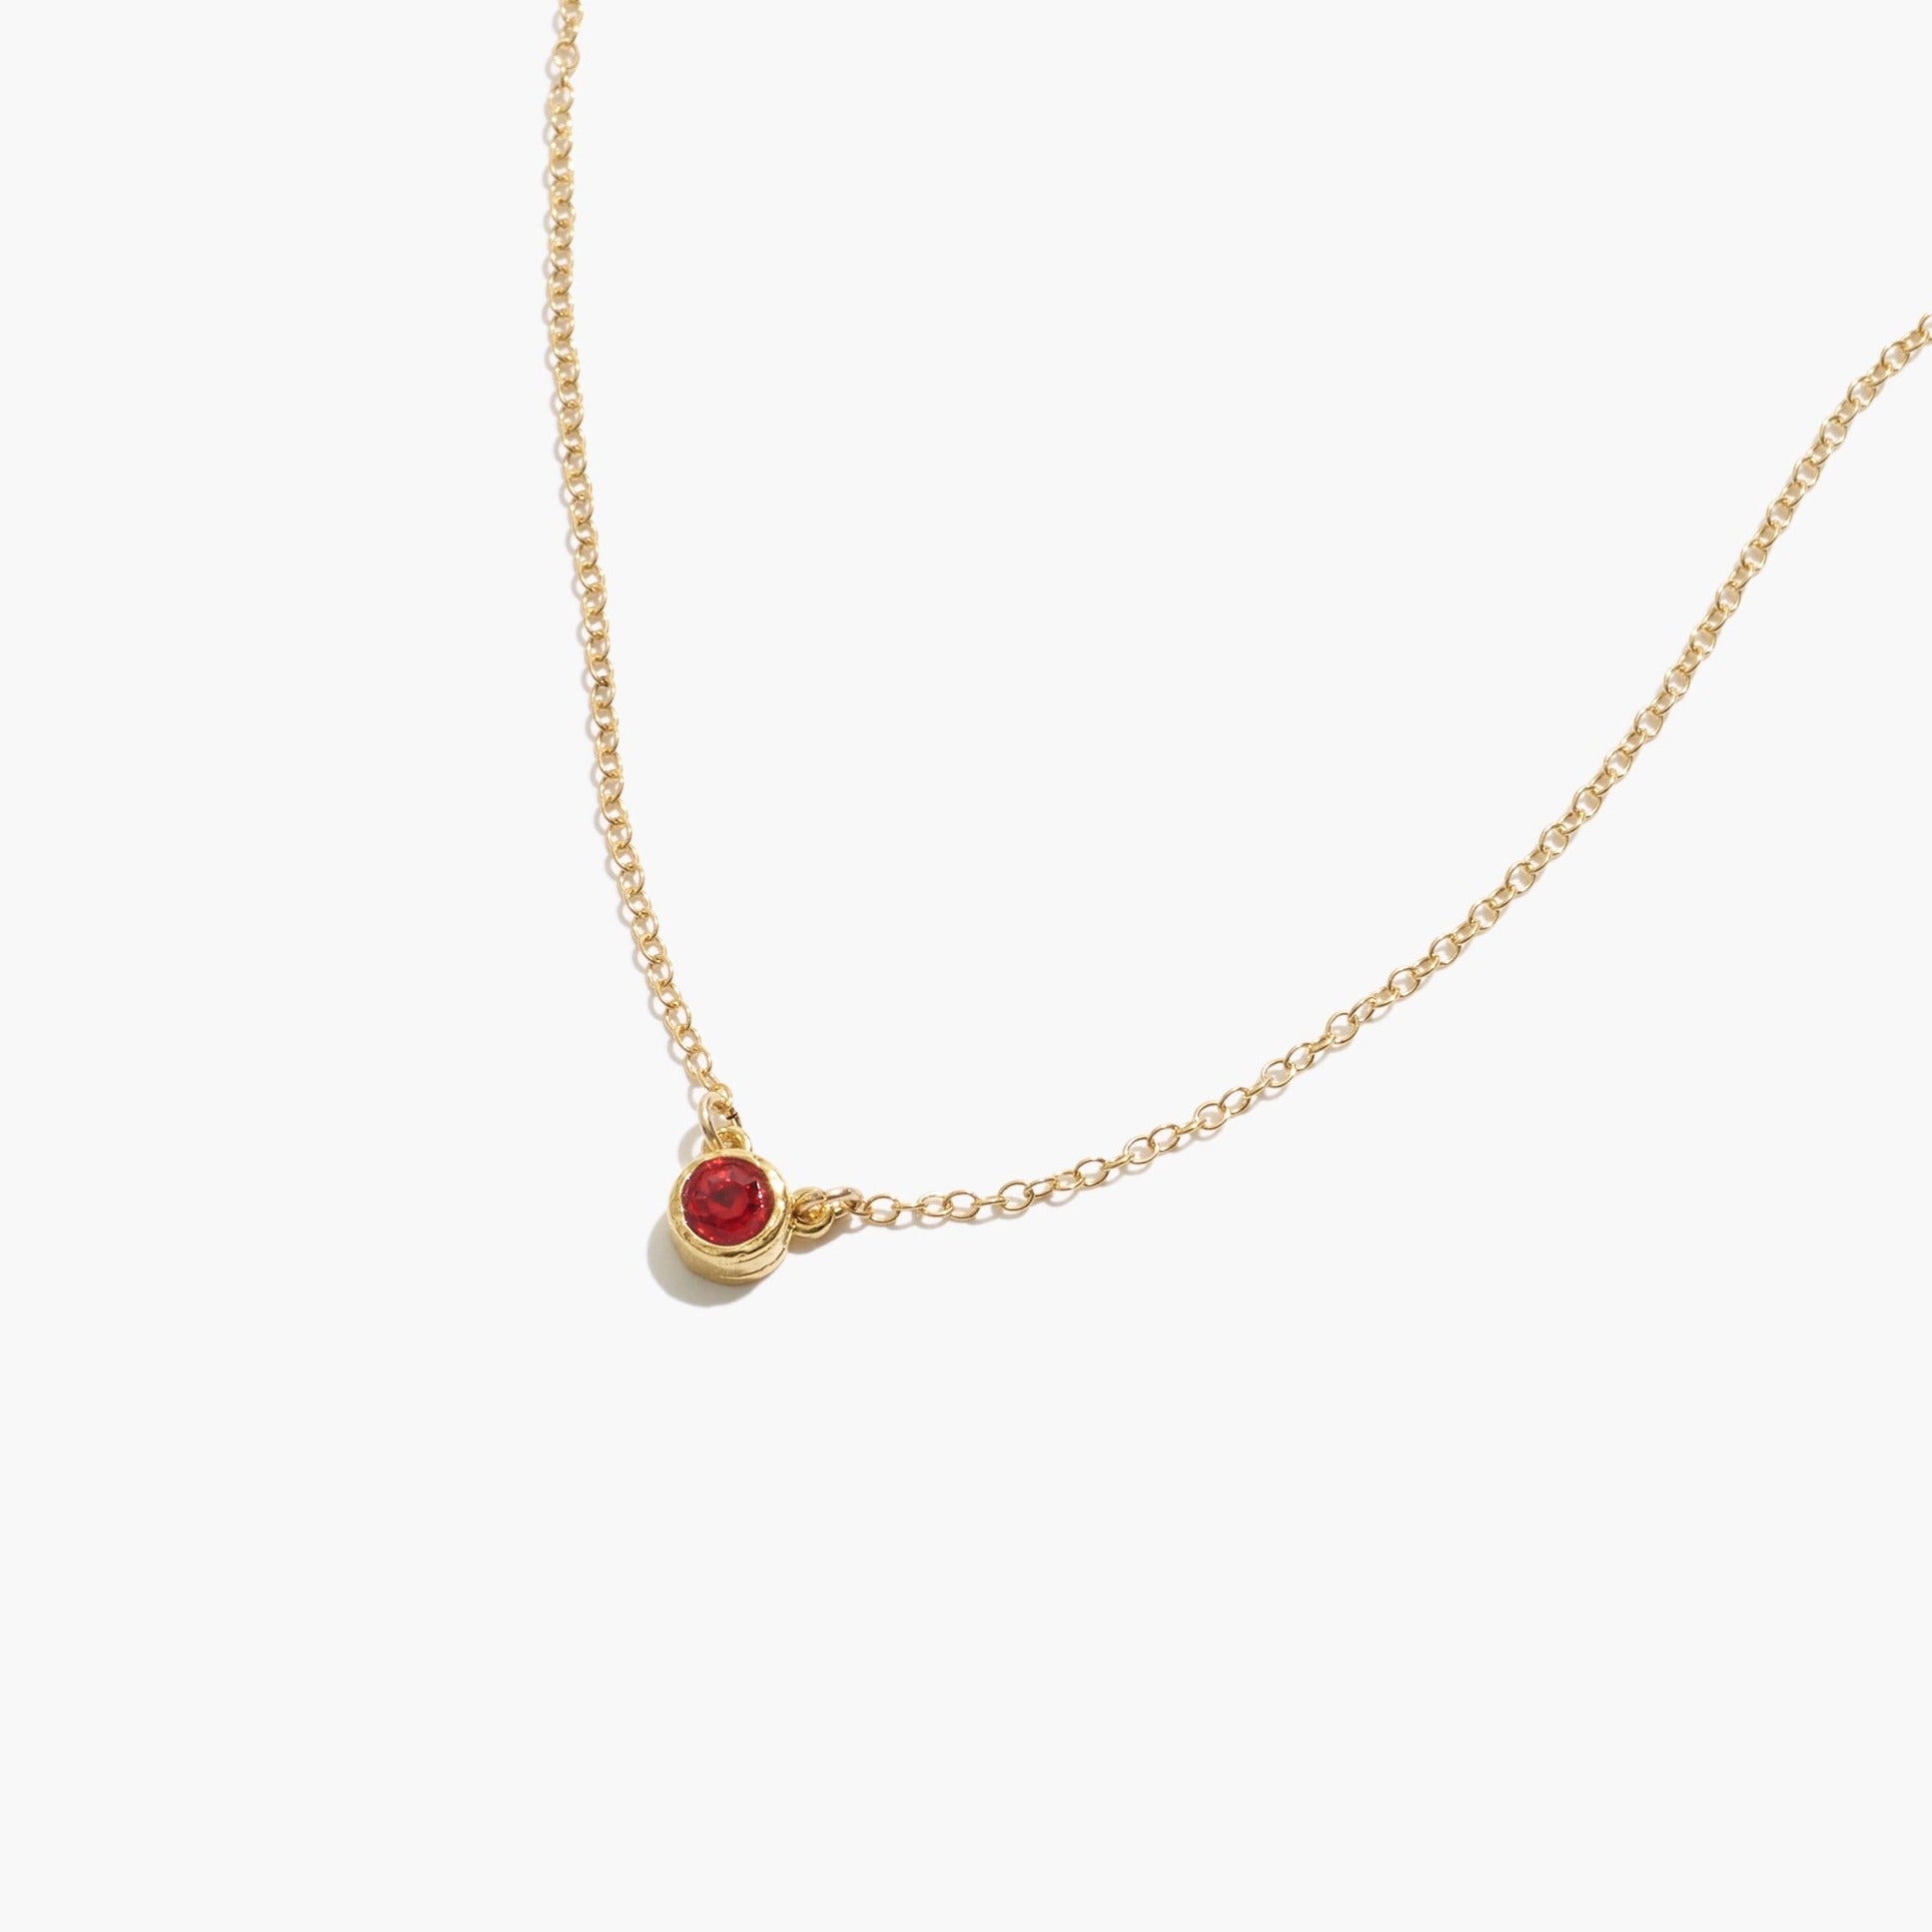 Gold Birthstone Necklace by Katie Dean Jewelry, made in America, perfect for the dainty minimal jewelry lovers, January